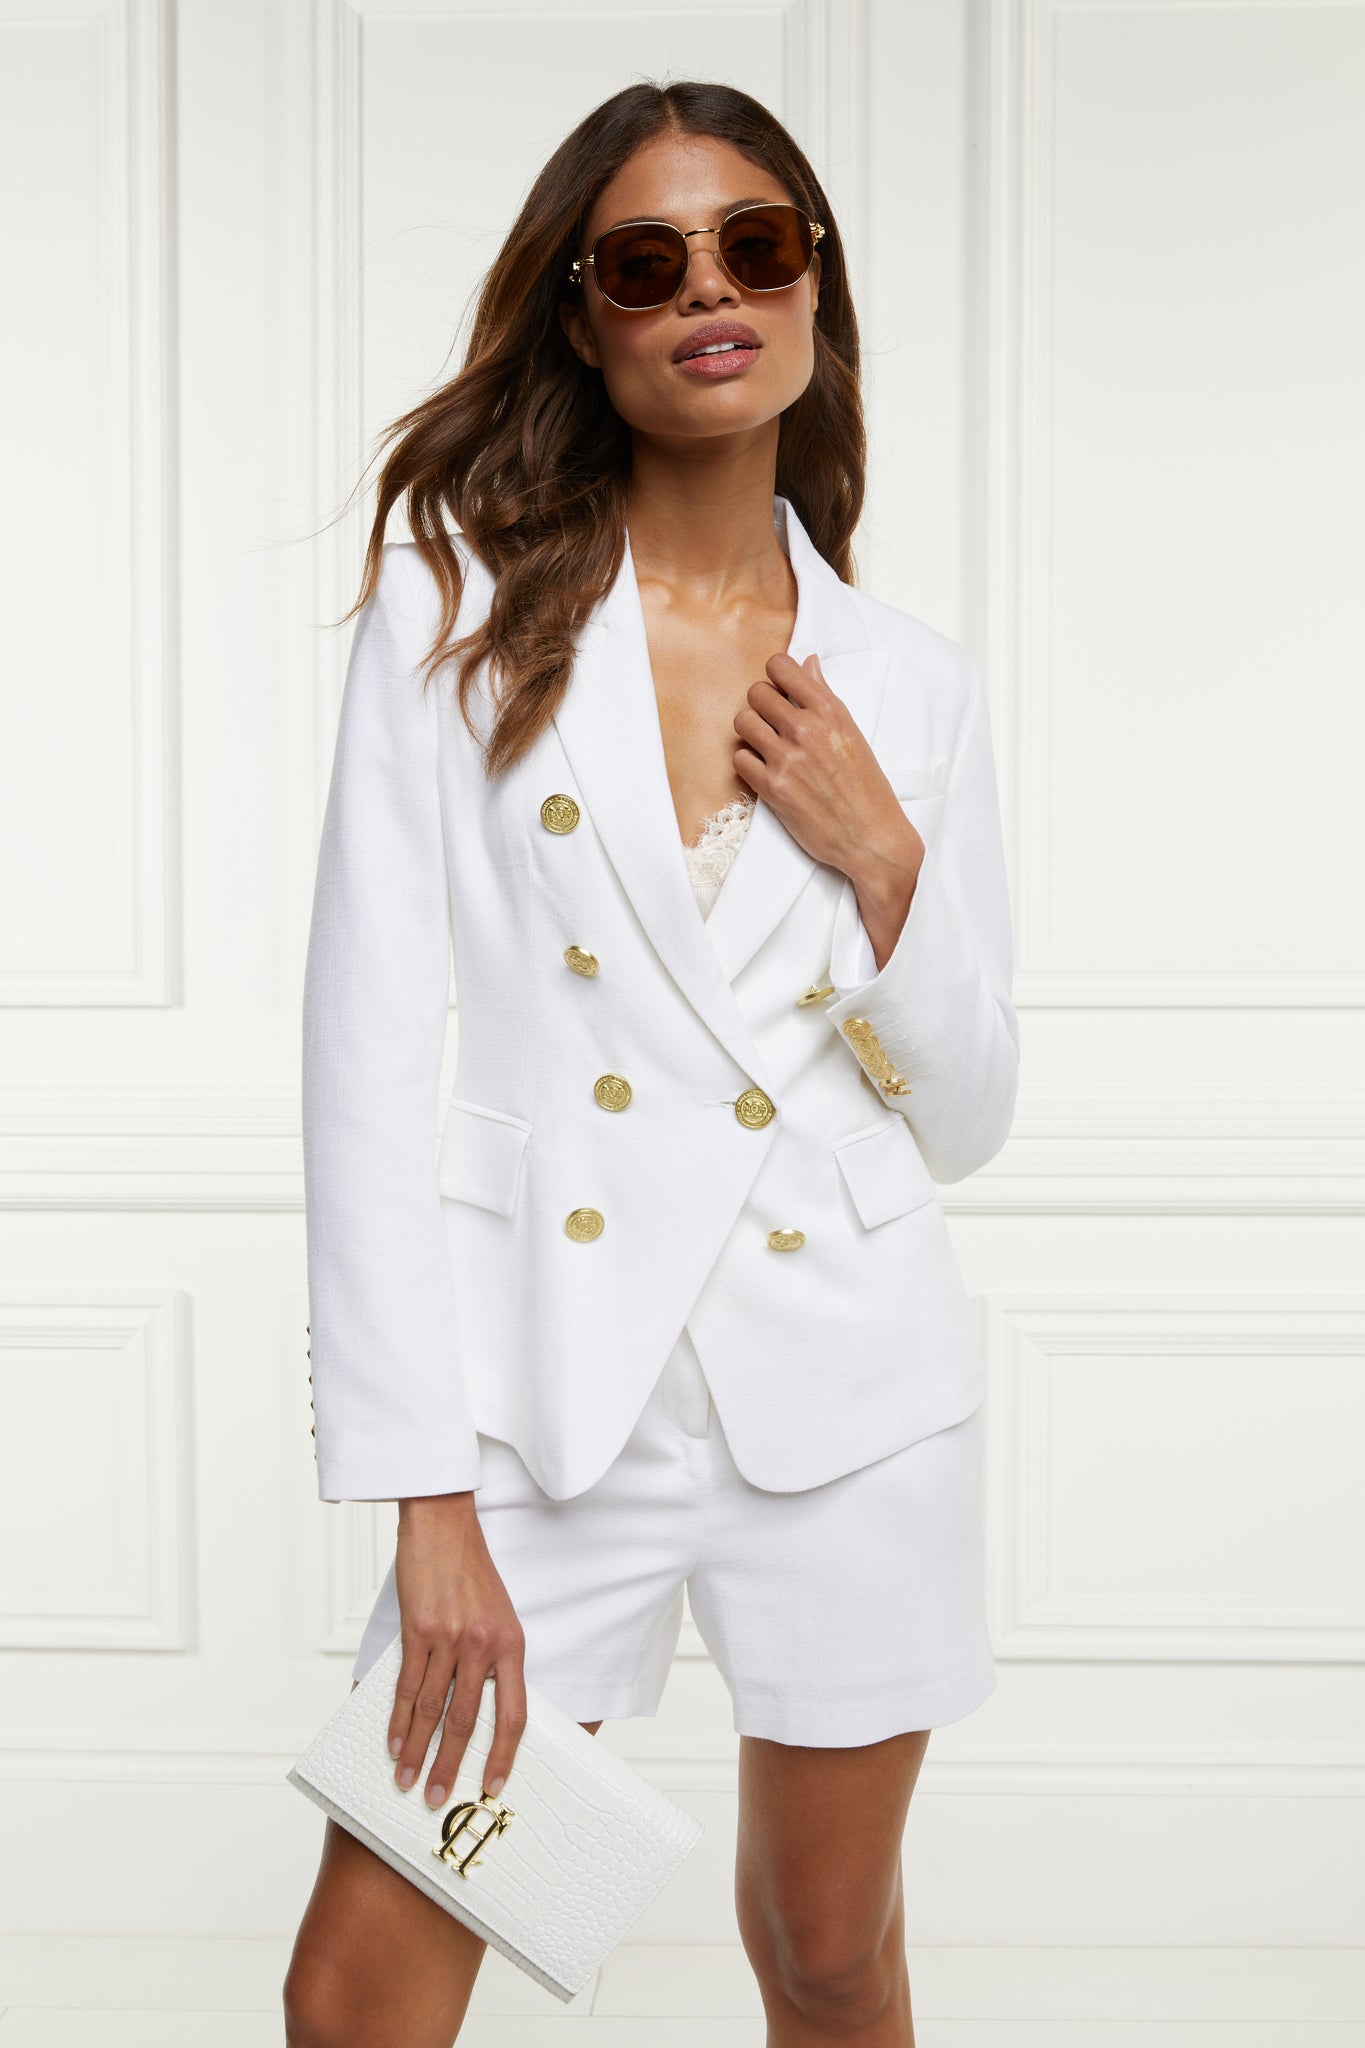 British made double breasted blazer that fastens with a single button hole to create a more form fitting silhouette with two pockets and gold button detailing this blazer in white linen